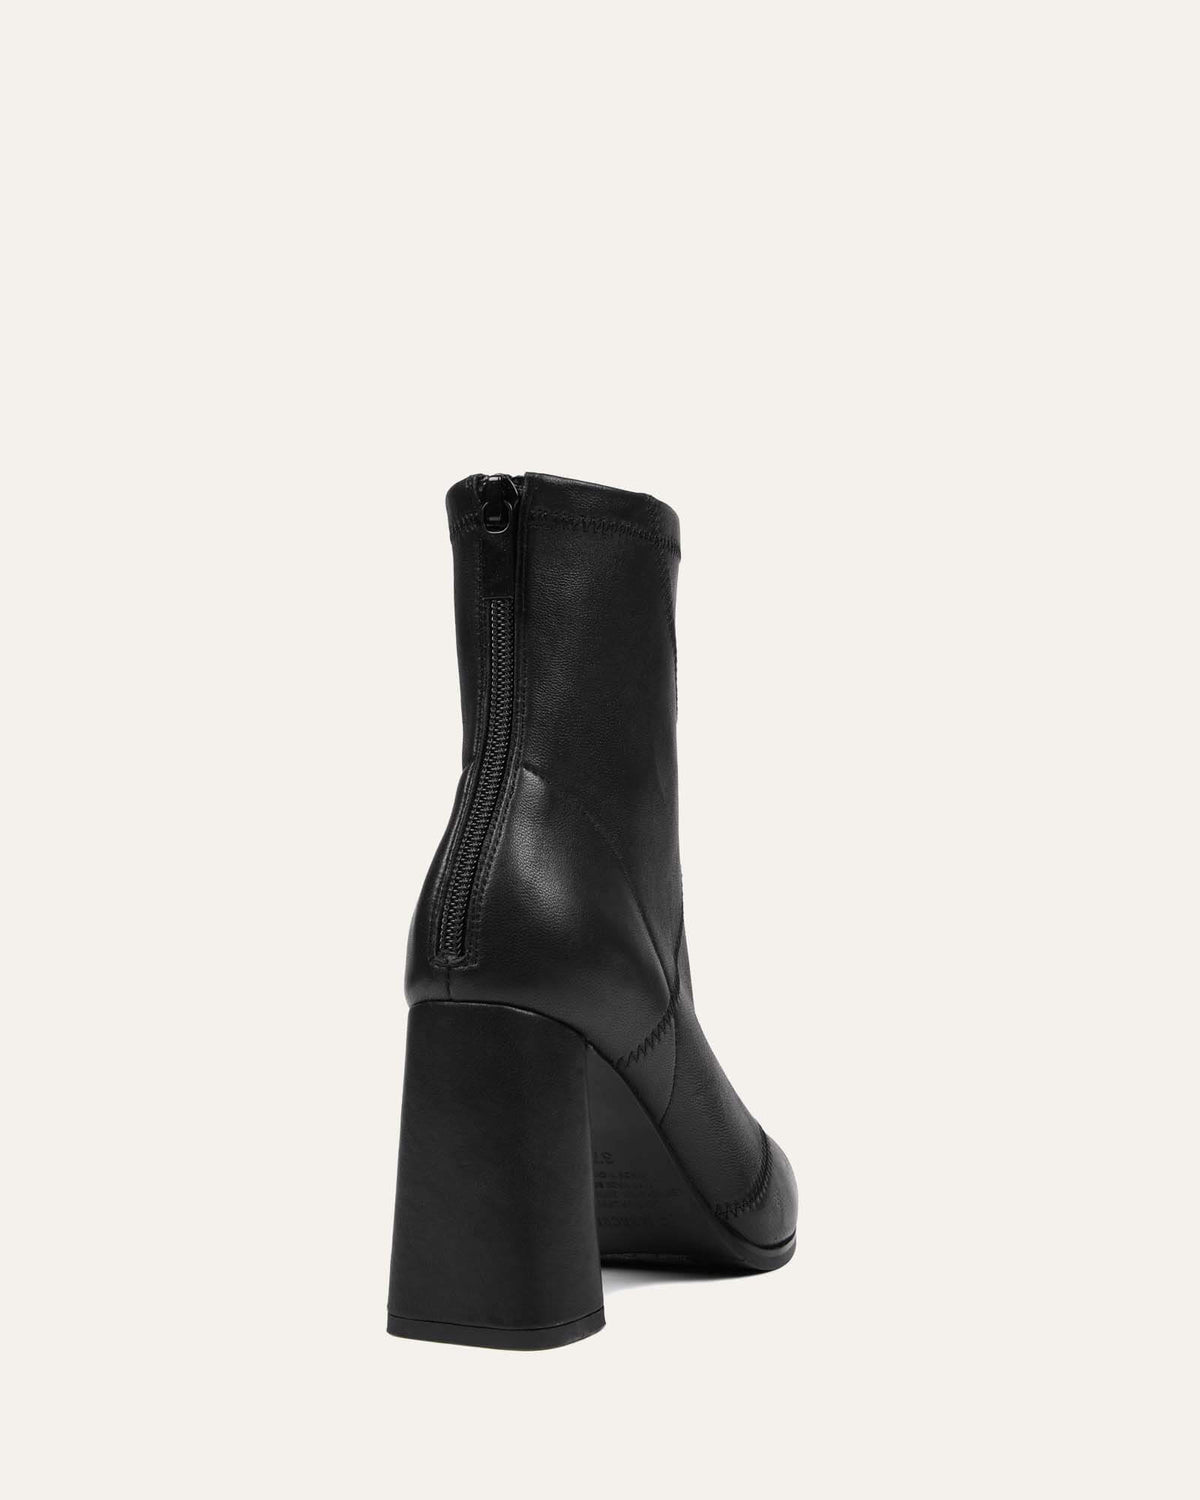 TEX HIGH ANKLE BOOTS BLACK LEATHER